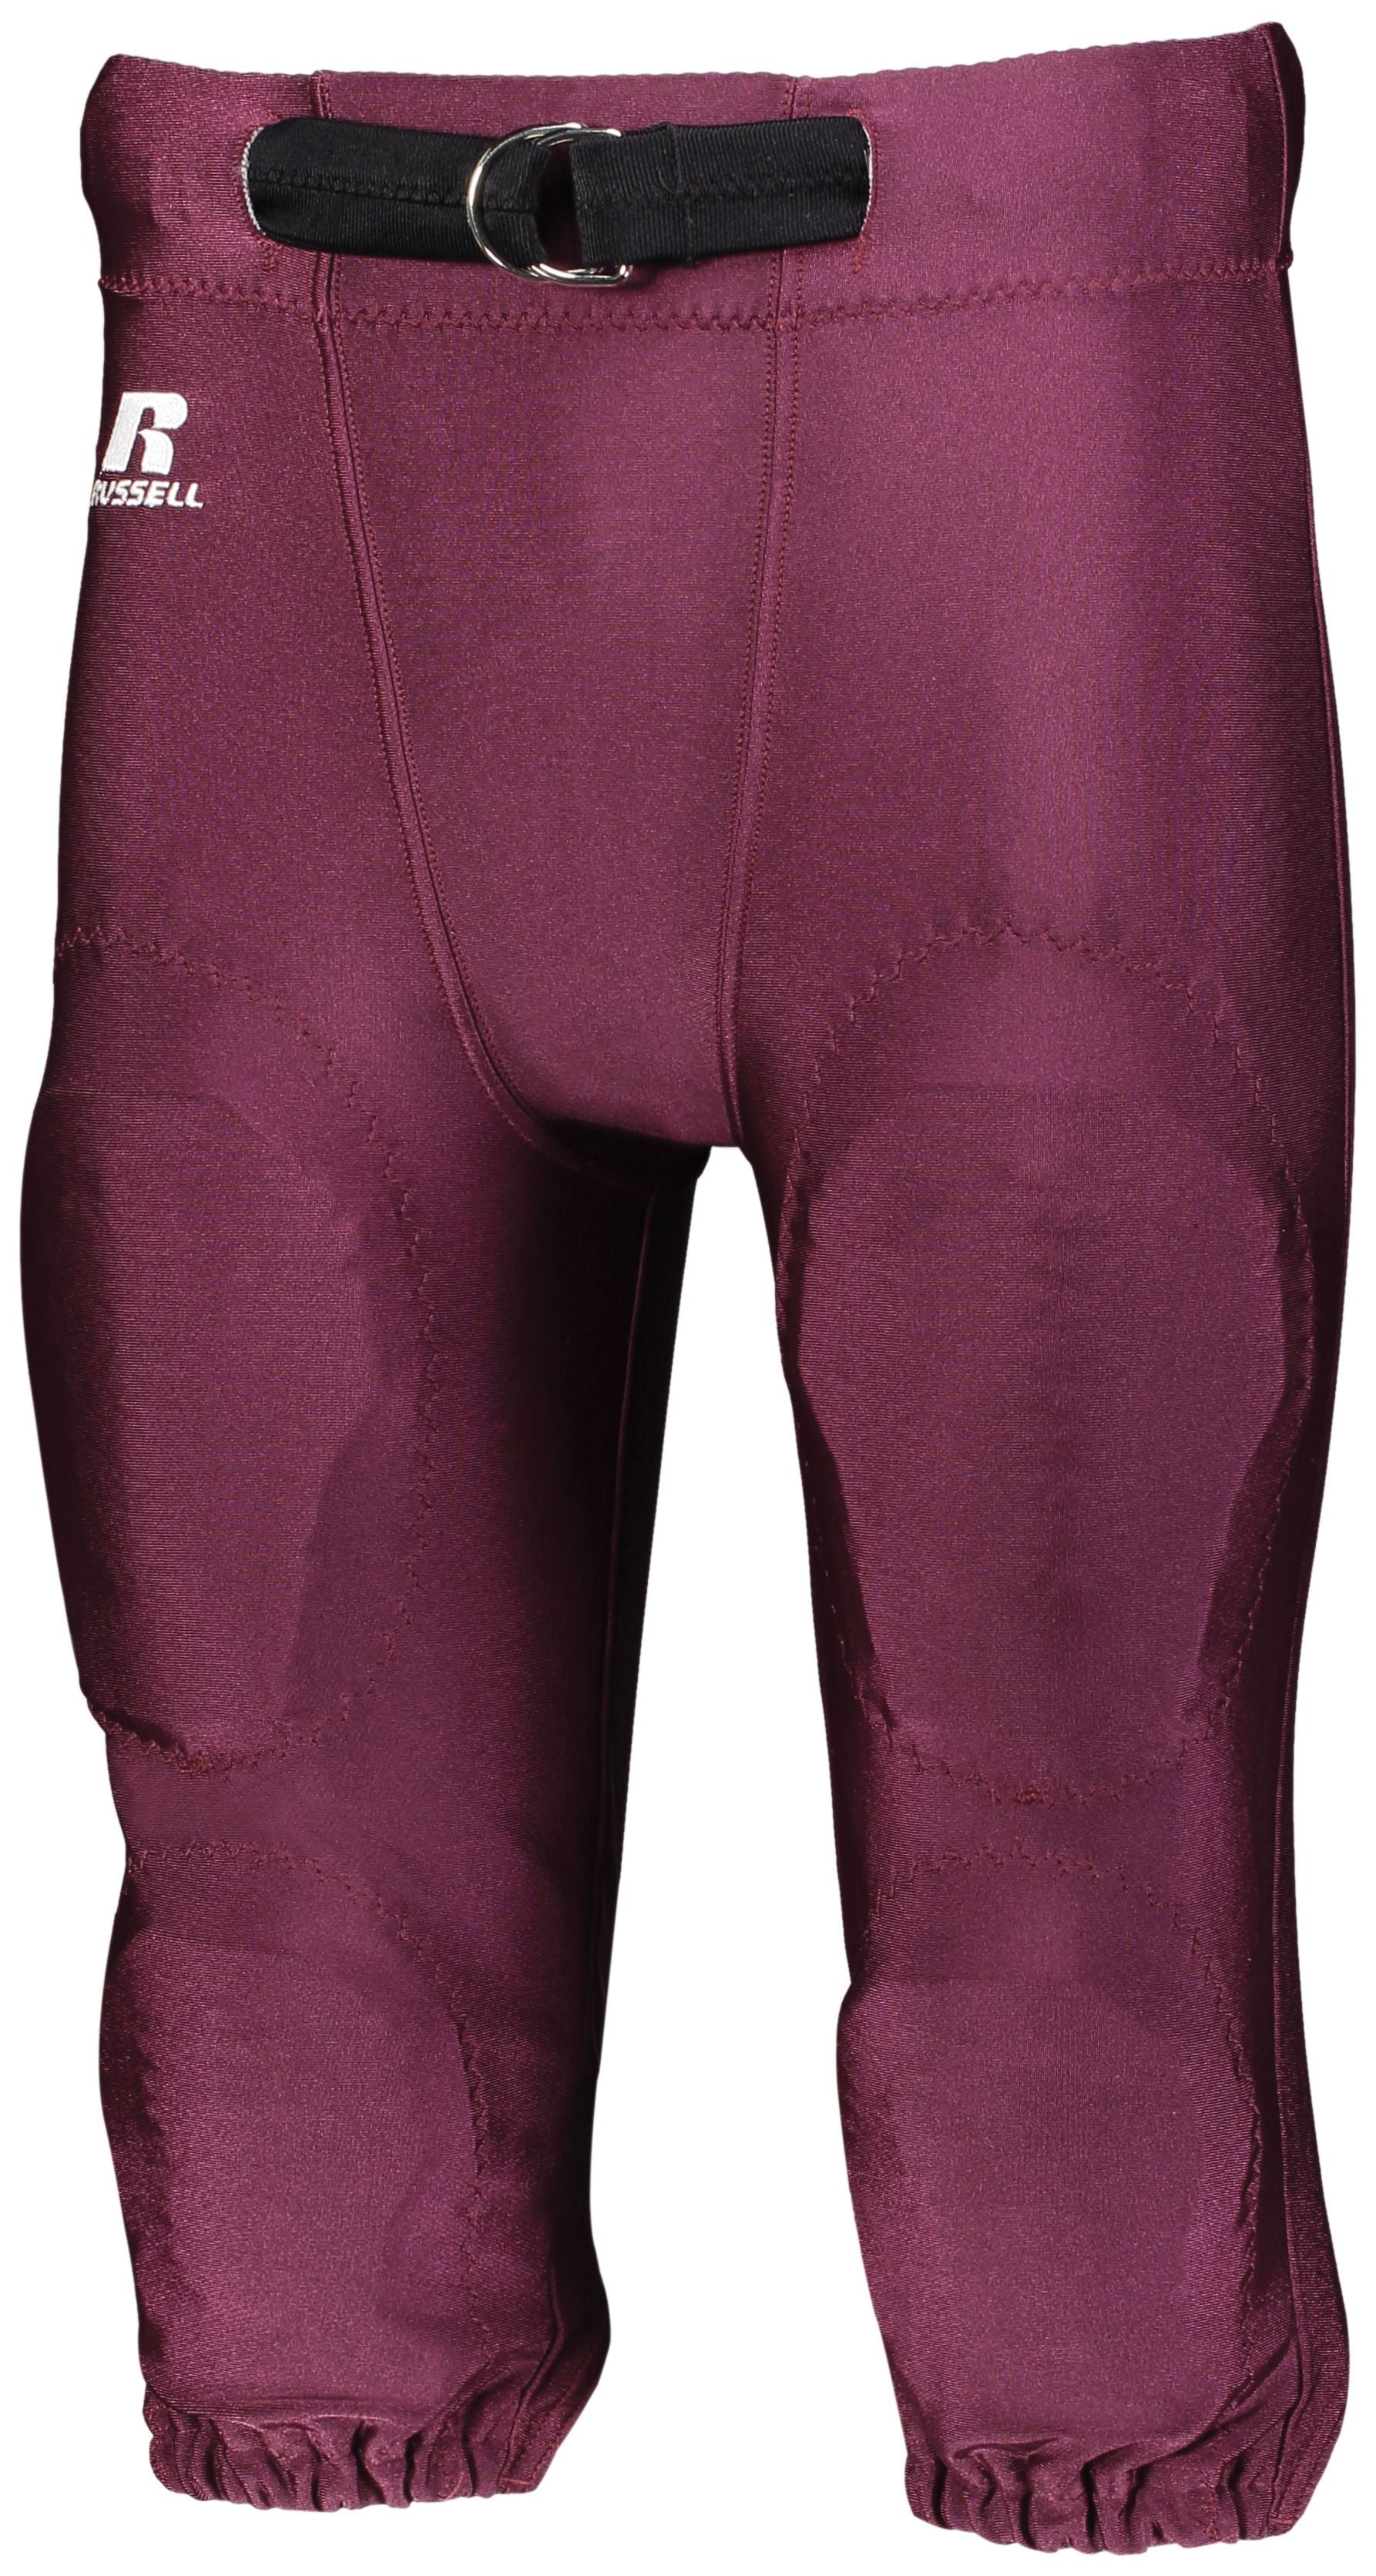 Russell Athletic Deluxe Game Pant in Maroon  -Part of the Adult, Adult-Pants, Pants, Football, Russell-Athletic-Products, All-Sports, All-Sports-1 product lines at KanaleyCreations.com